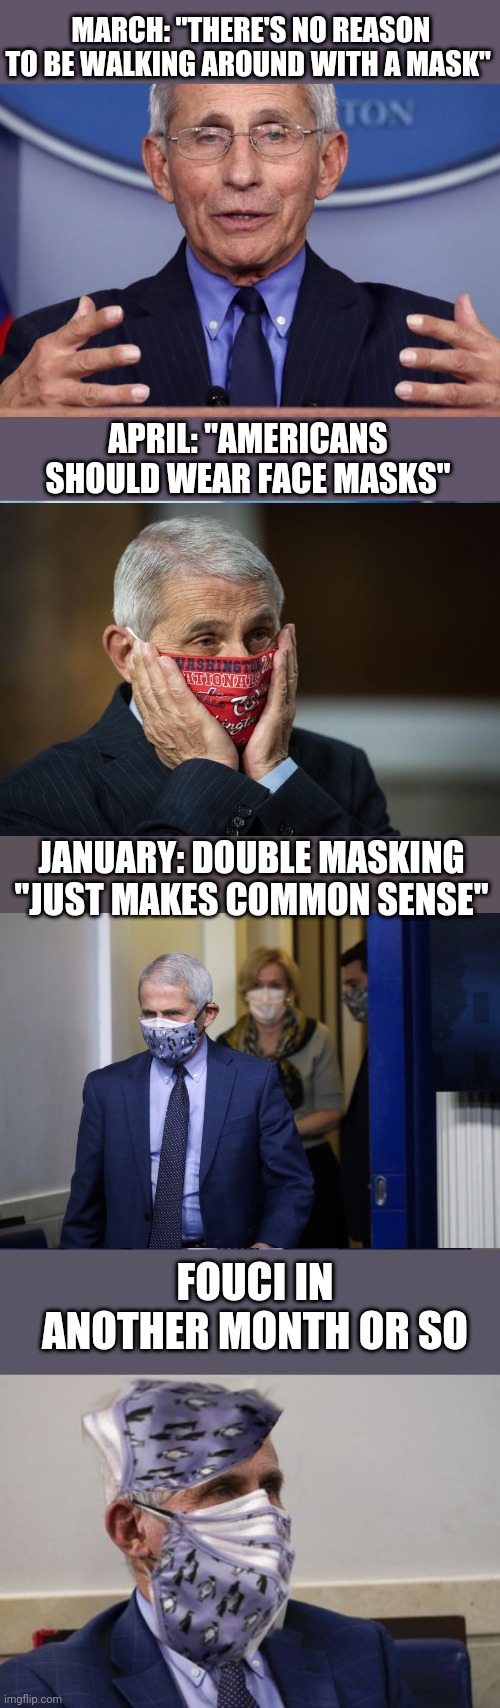 Fauci: Here's another Ouchie |  MARCH: "THERE'S NO REASON TO BE WALKING AROUND WITH A MASK"; APRIL: "AMERICANS SHOULD WEAR FACE MASKS"; JANUARY: DOUBLE MASKING "JUST MAKES COMMON SENSE"; FOUCI IN ANOTHER MONTH OR SO | image tagged in dr anthony fauci,dr fauci,masks | made w/ Imgflip meme maker